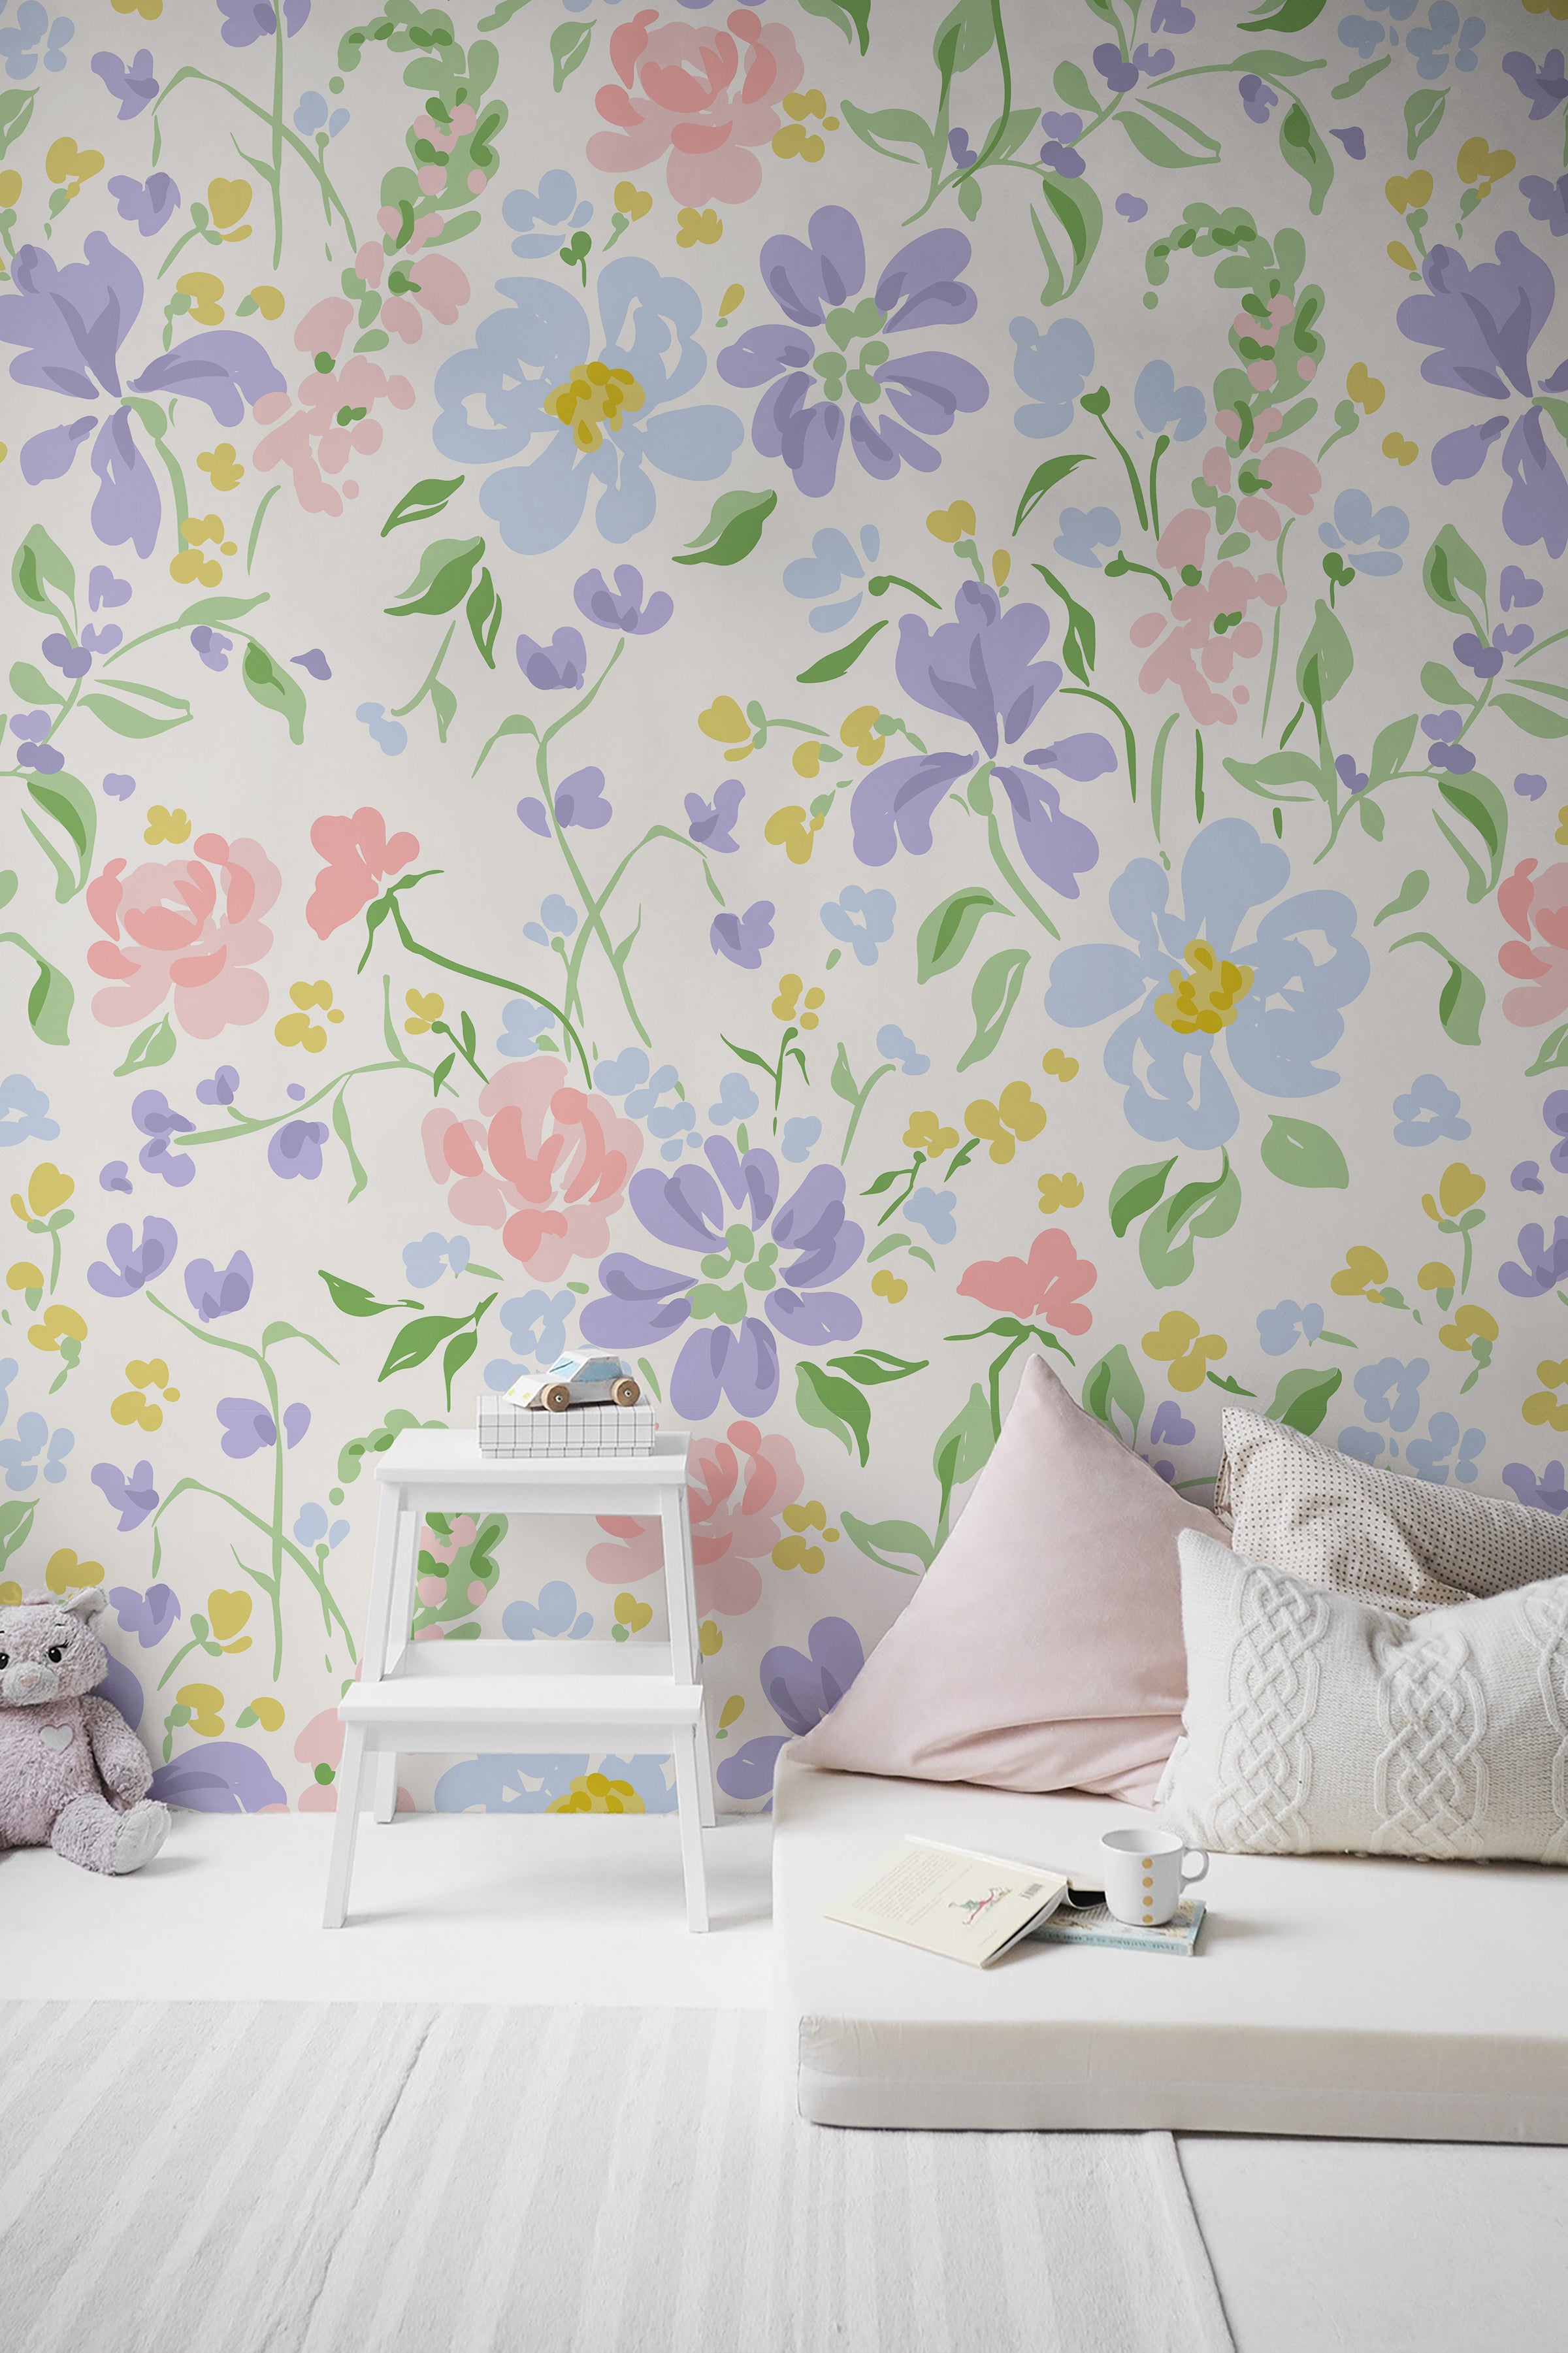 A cozy corner of a child's room decorated with Romana Wallpaper showcasing a vibrant floral pattern in soft pastels. A white bed and step stool are complemented by a pale pink pillow and a cuddly toy, creating a peaceful and playful ambiance